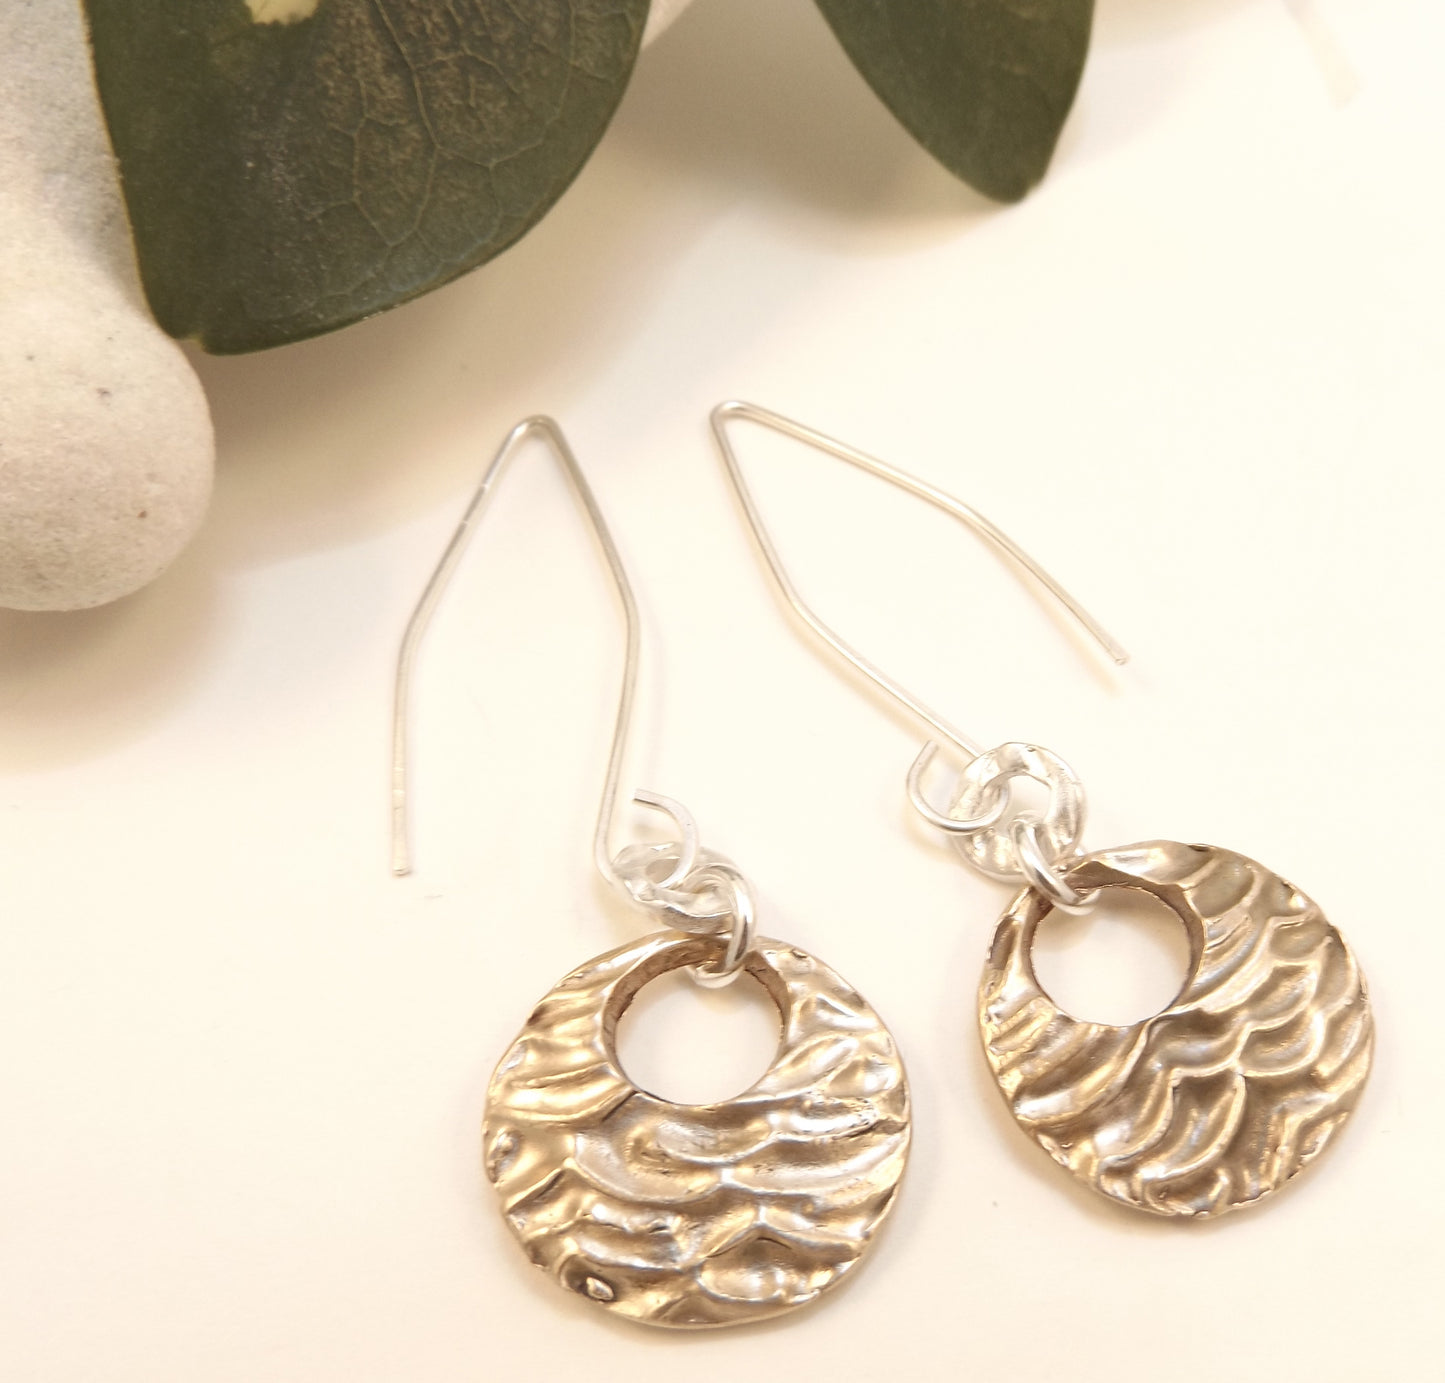 Jenni - Silver and Gold Earrings